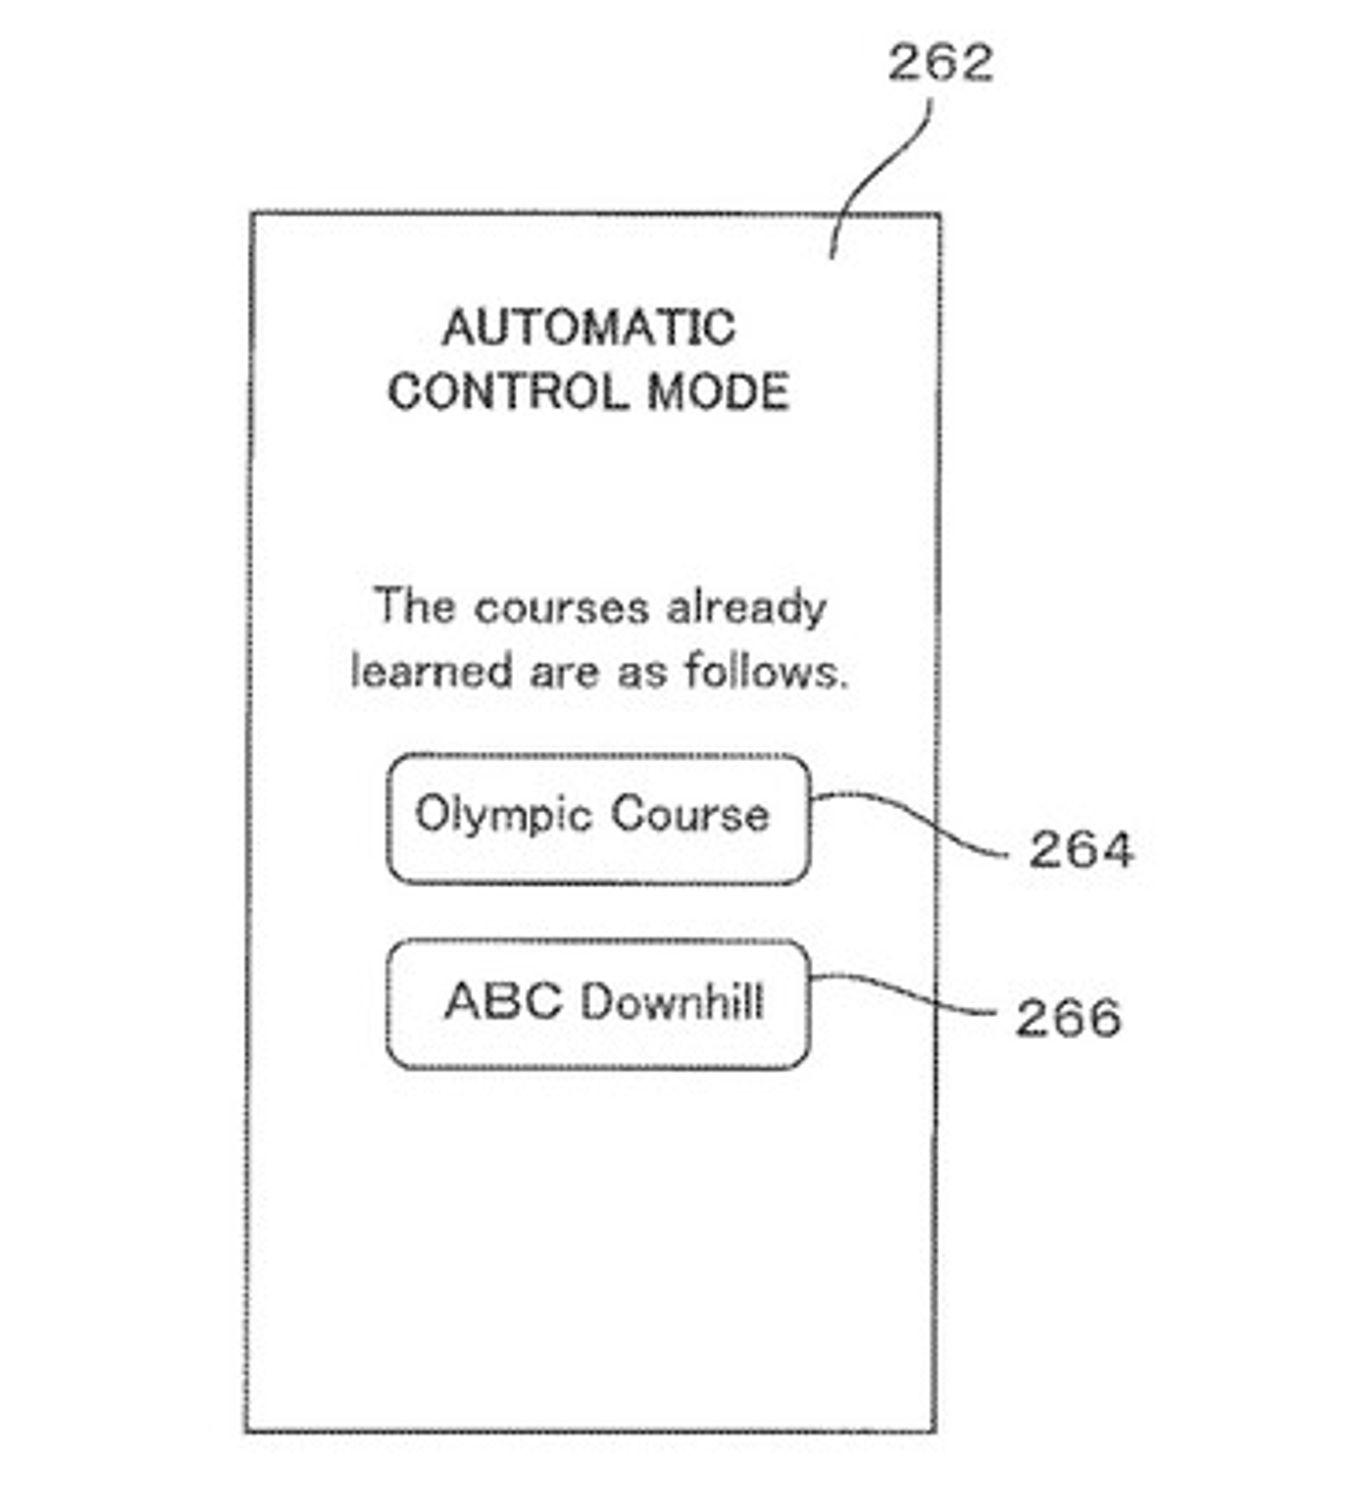 The patent also indicates that courses can be saved in a library for later use